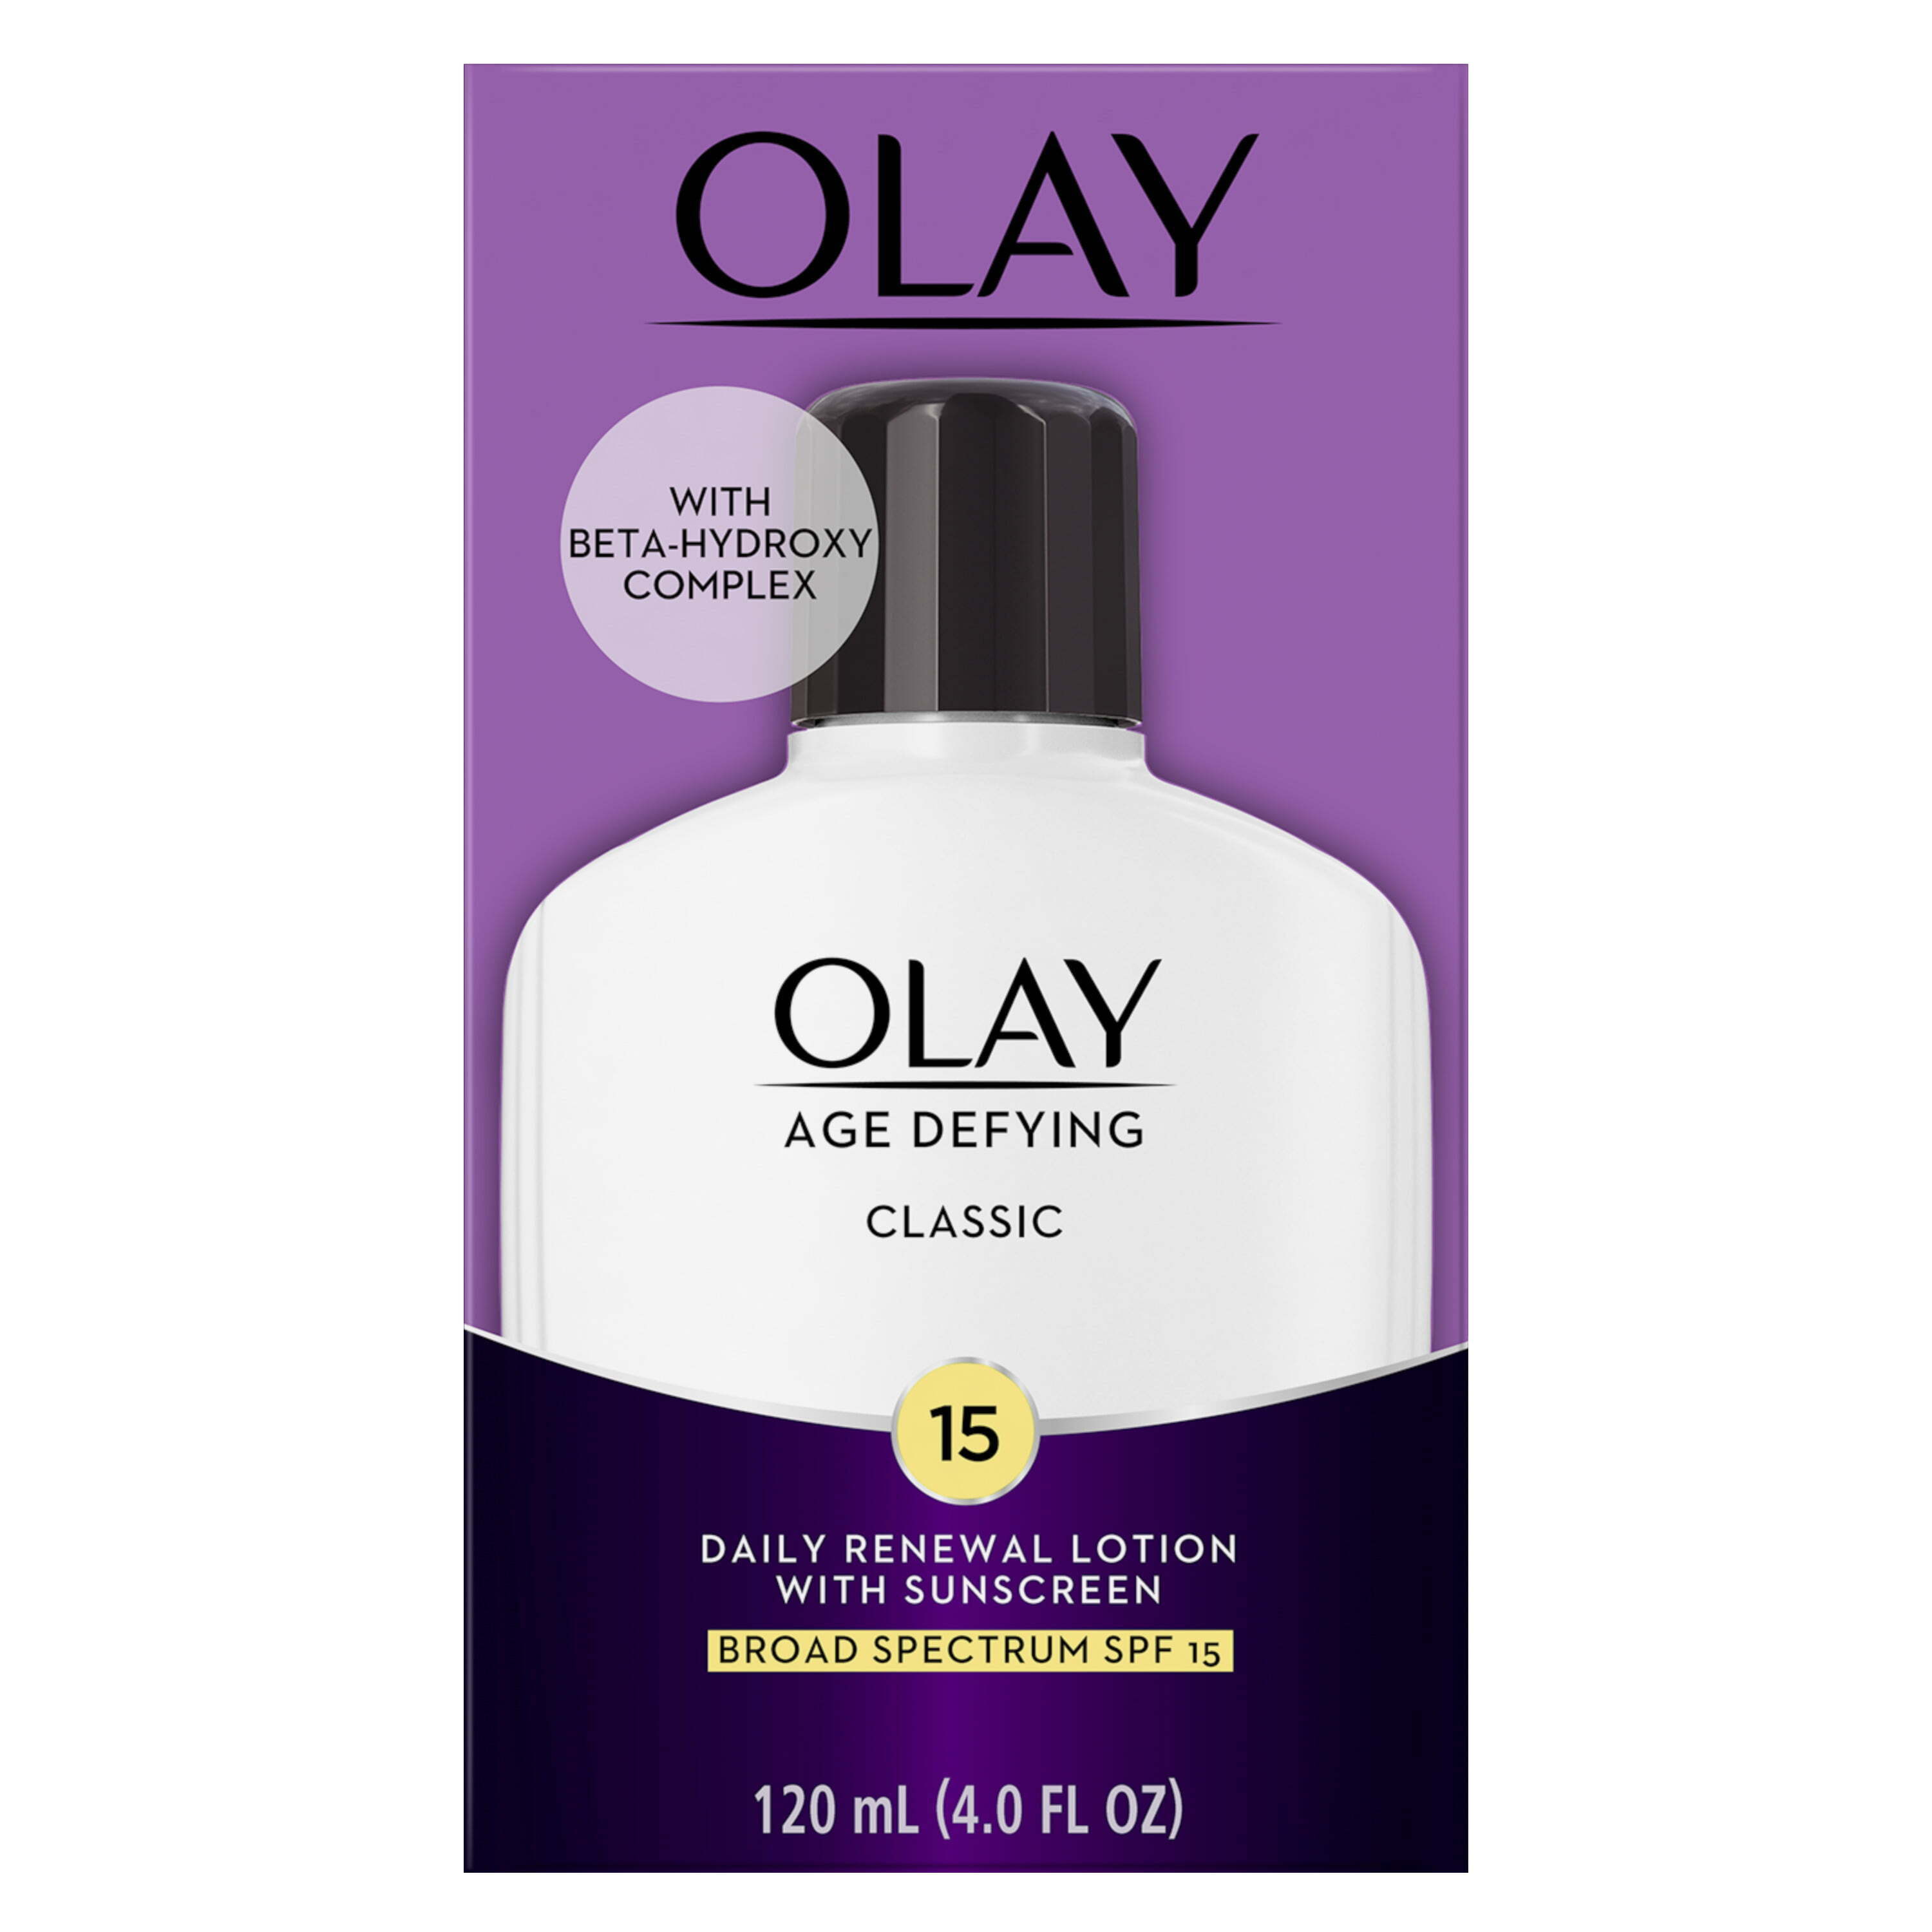 Olay Age Defying Classic Daily Renewal Lotion, Fights Fine Lines & Wrinkles, Normal Skin, SPF 15, 4 fl oz - image 10 of 10